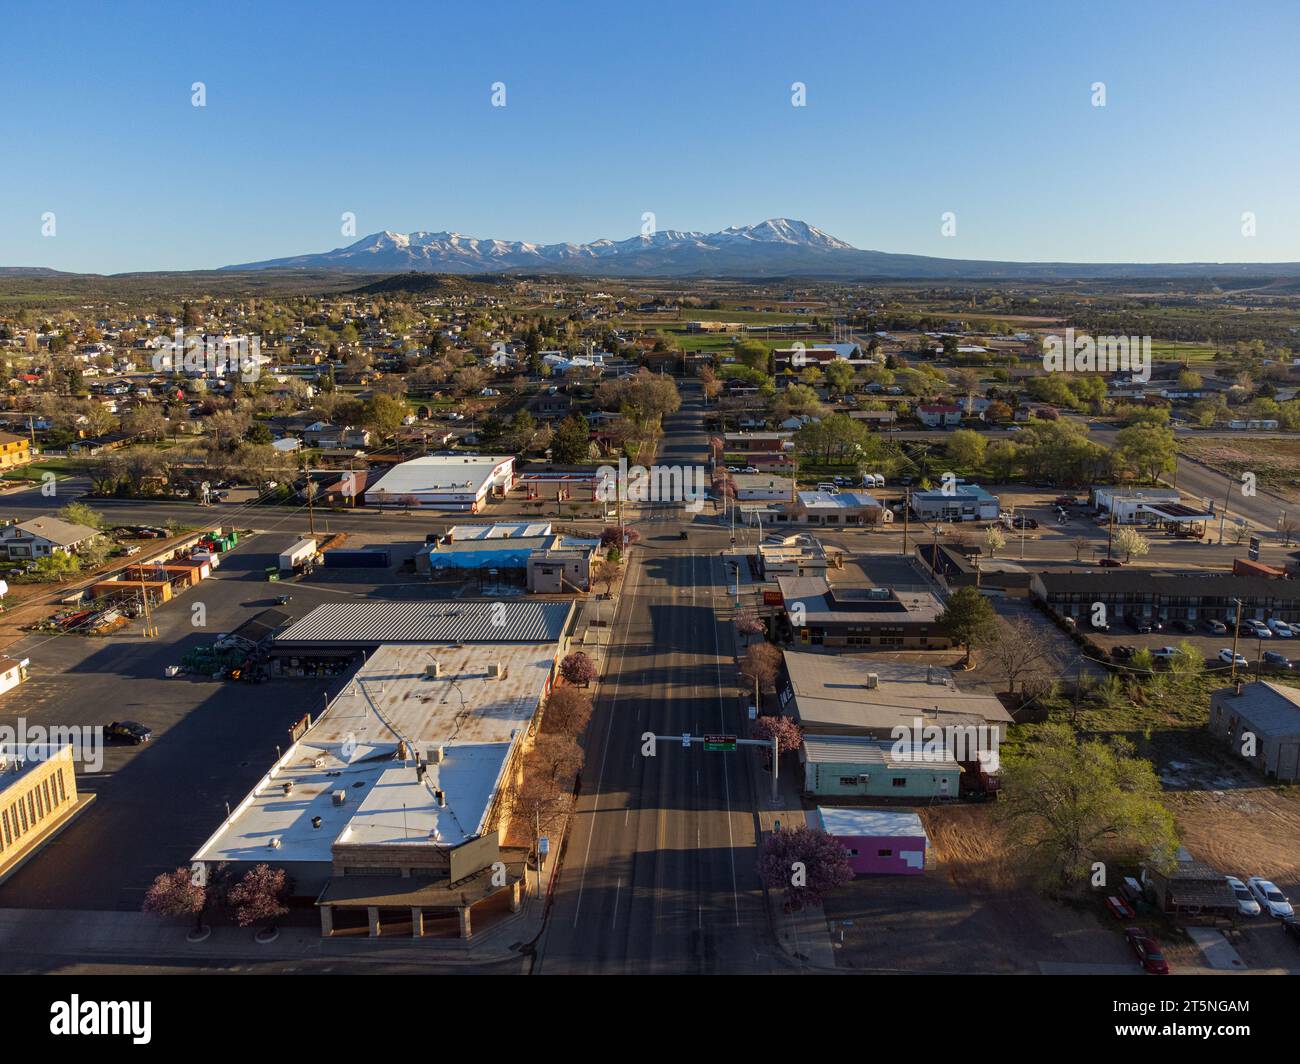 Panoramic view of the small rural town of Blanding, Utah in the spring blossom time, blue sky and snowcapped mountains. Stock Photo